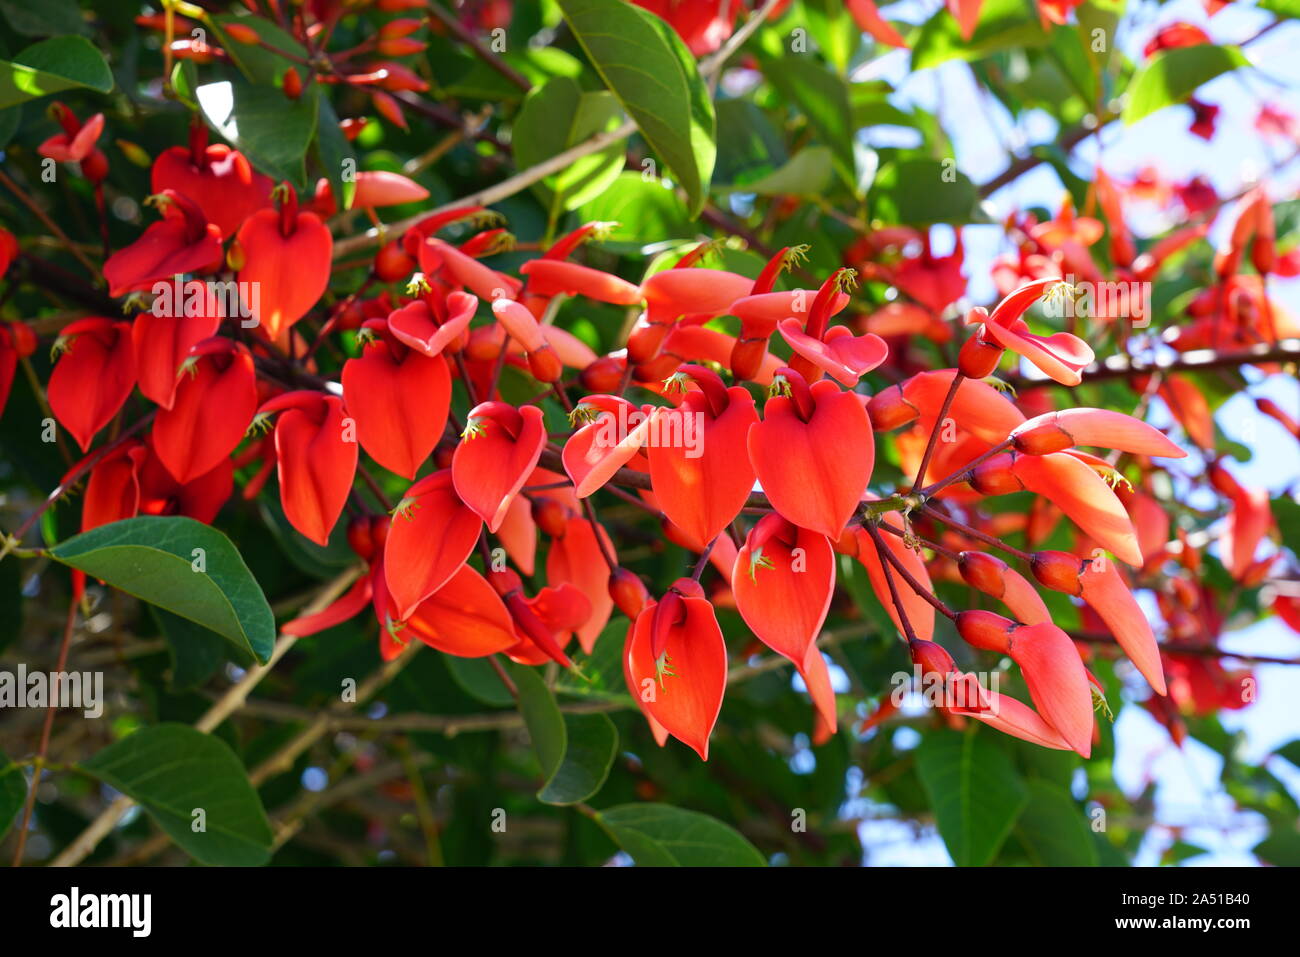 View of the red flowers of the Erythrina tree Stock Photo